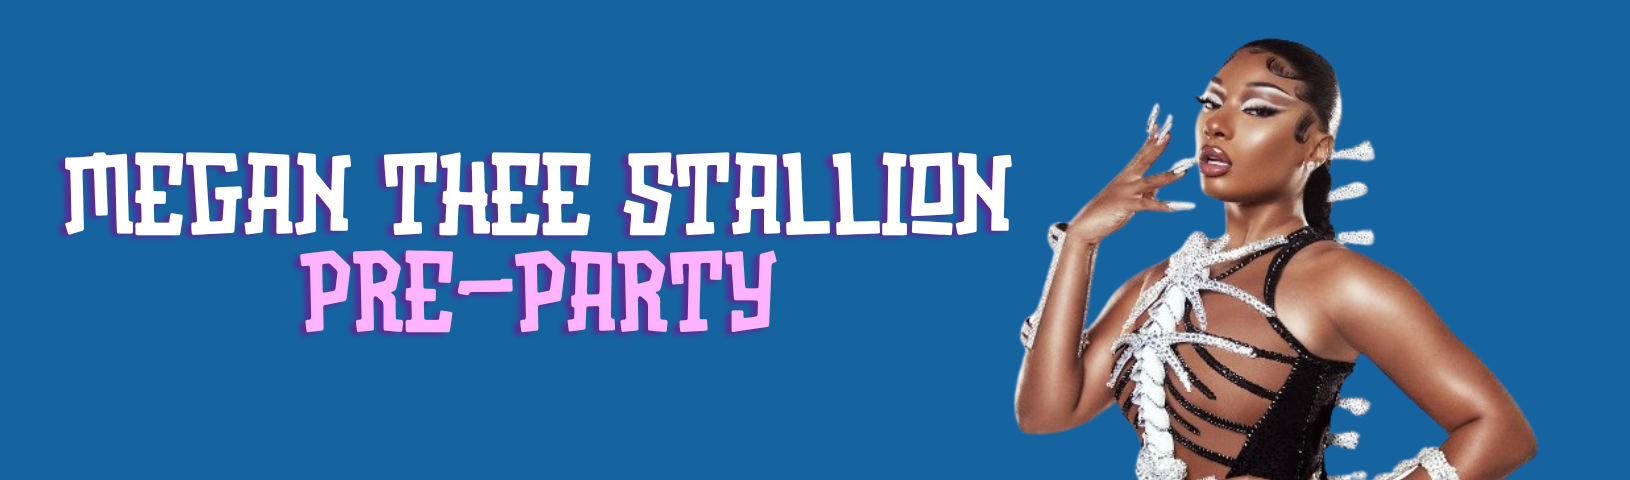 MEGAN THEE STALLION PRE-PARTY Background Image